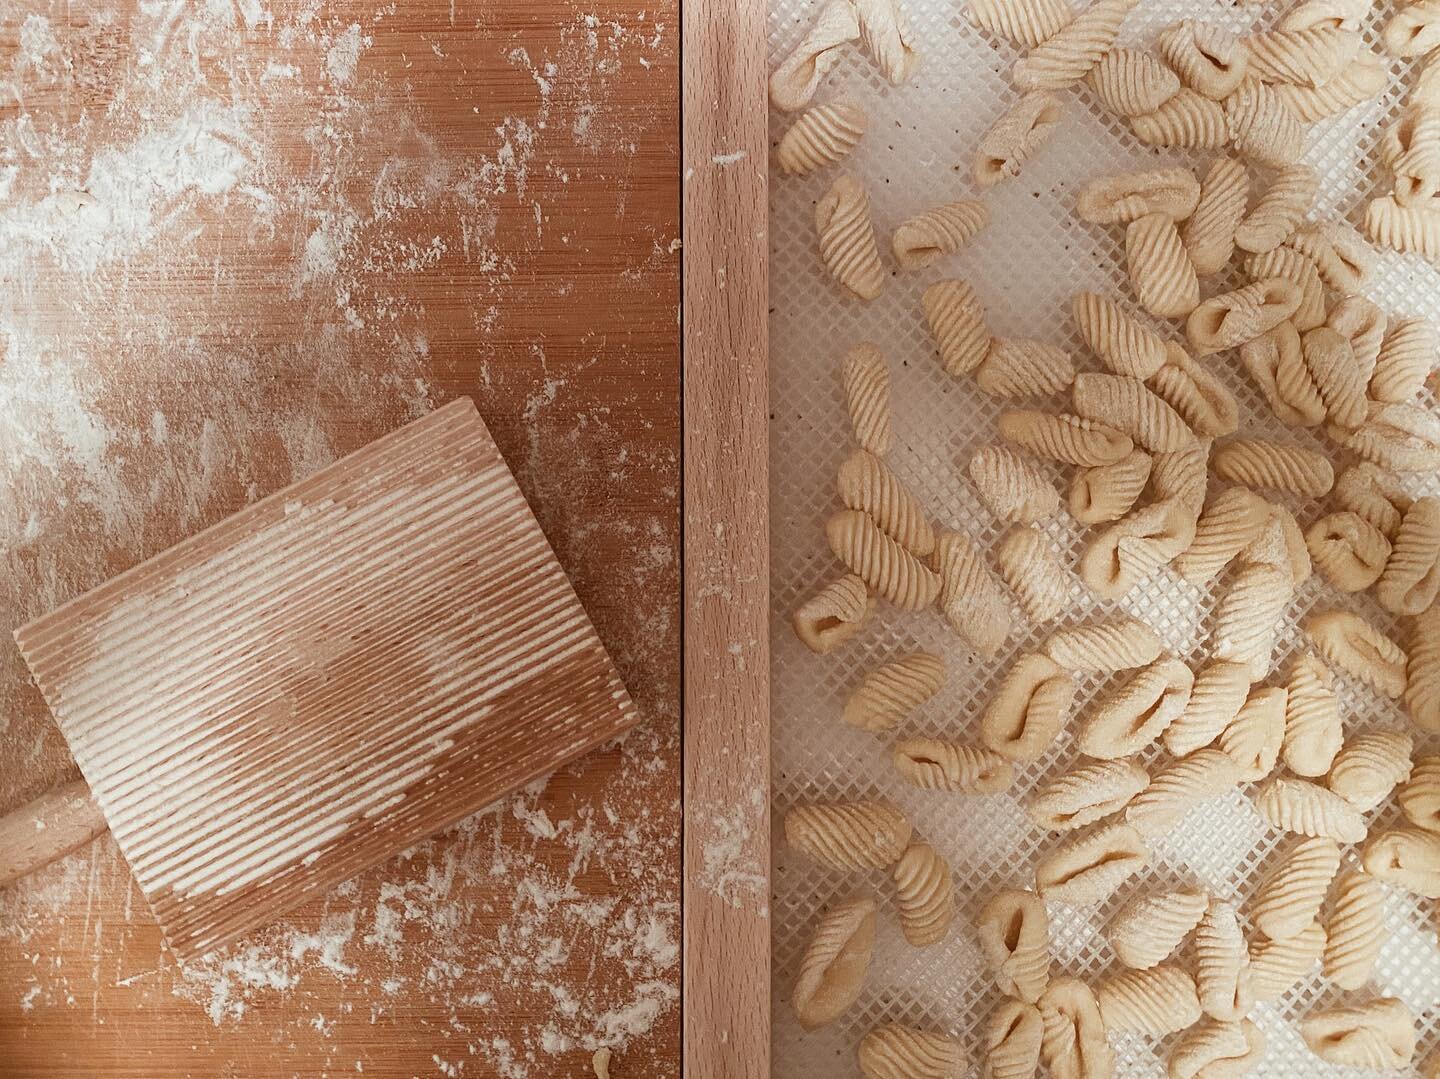 Update: they&rsquo;ve all found new homes! Meet these Cavatelli cuties! Each batch was individually kneaded, rolled, cut and hand-shaped, one by one. Super limited batch at 10 lbs. $5 per 1/2 lb and delivered right to you! Because I love you and want